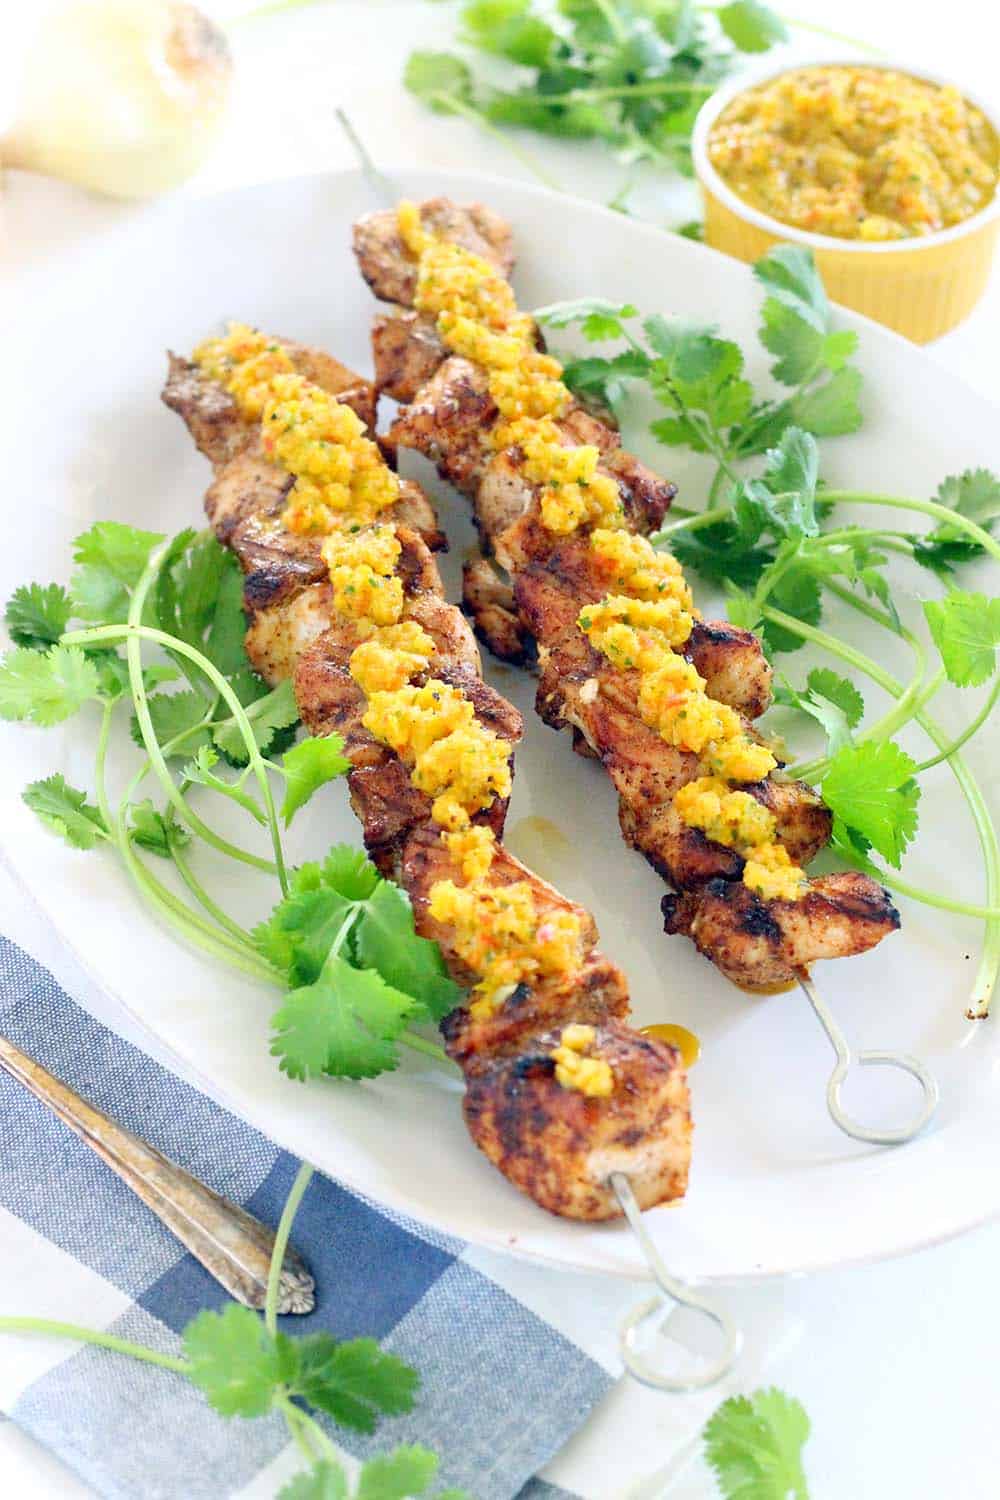 These Grilled Chicken Skewers and are DELICIOUS paired with charred Sweet Pepper Relish! Paleo, low-carb, and gluten-free. Everything cooks on the grill- use any extra relish for hot dogs at your next summer cookout.